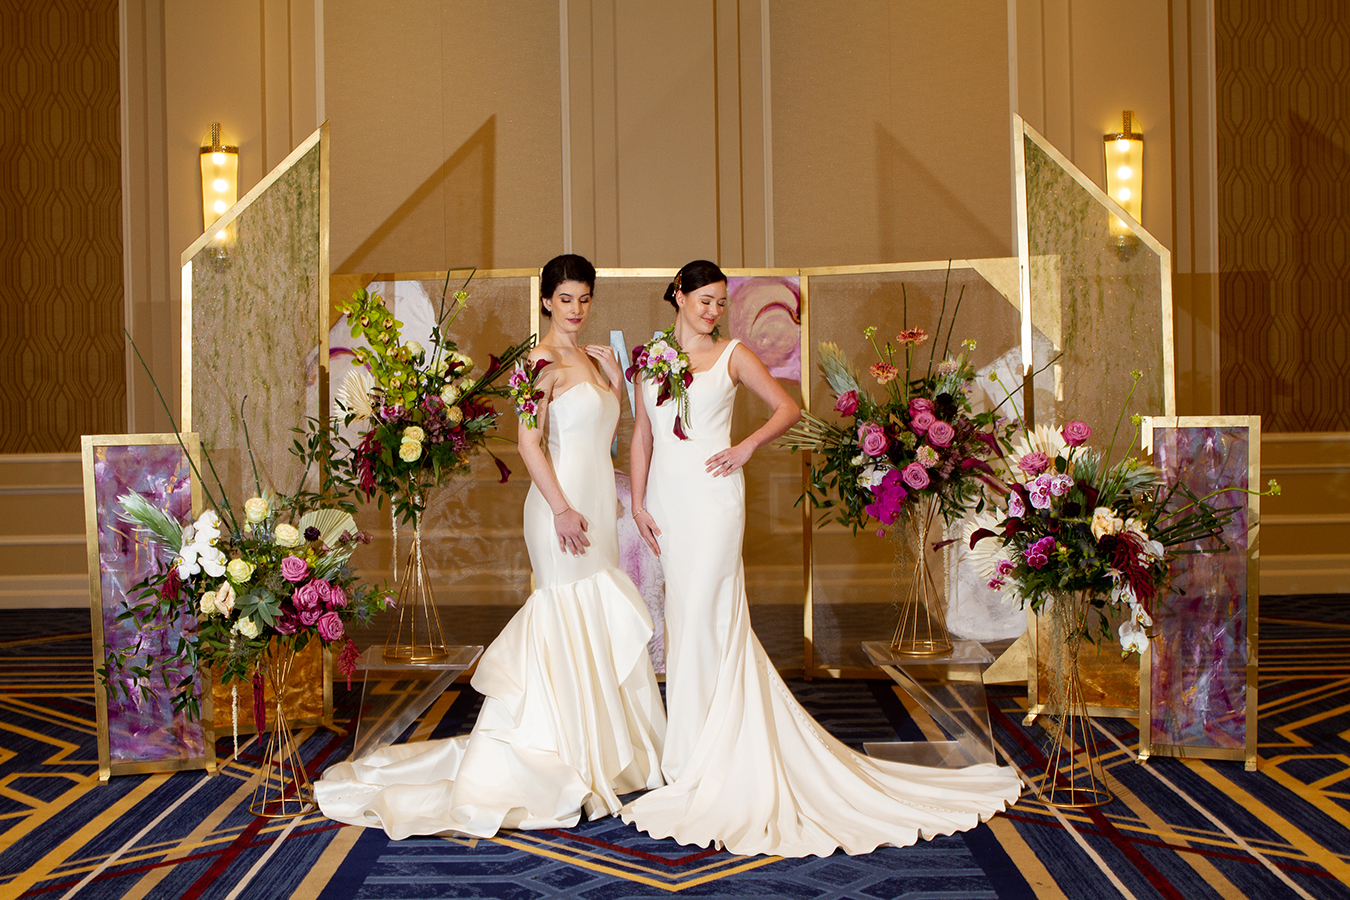 Julie and Kaylei pose in front of a series of hand-painted screen backdrops amid lush florals from Mitch’s Flowers. Both women wear elegant floral pieces, alternatives to traditional bouquets, designed by Mitch’s Flowers. A custom-made monogram from Design A Latte Monograms is suspended from the center backdrop panel. Julie’s classic strapless Mikado silk gown is from Pearl’s Place with a diamond bangle, pearl stud earrings, contour baguette band with pear-shape diamond solitaire ring and an Art Deco studded band from Brilliance in Diamonds. Kaylei is wearing a simple, modern fit-and-flare gown from MaeMe The Bridal Boutique with a diamond bangle bracelet, “Marigold” ring and radiant cut diamond studs from Brilliance in Diamonds.